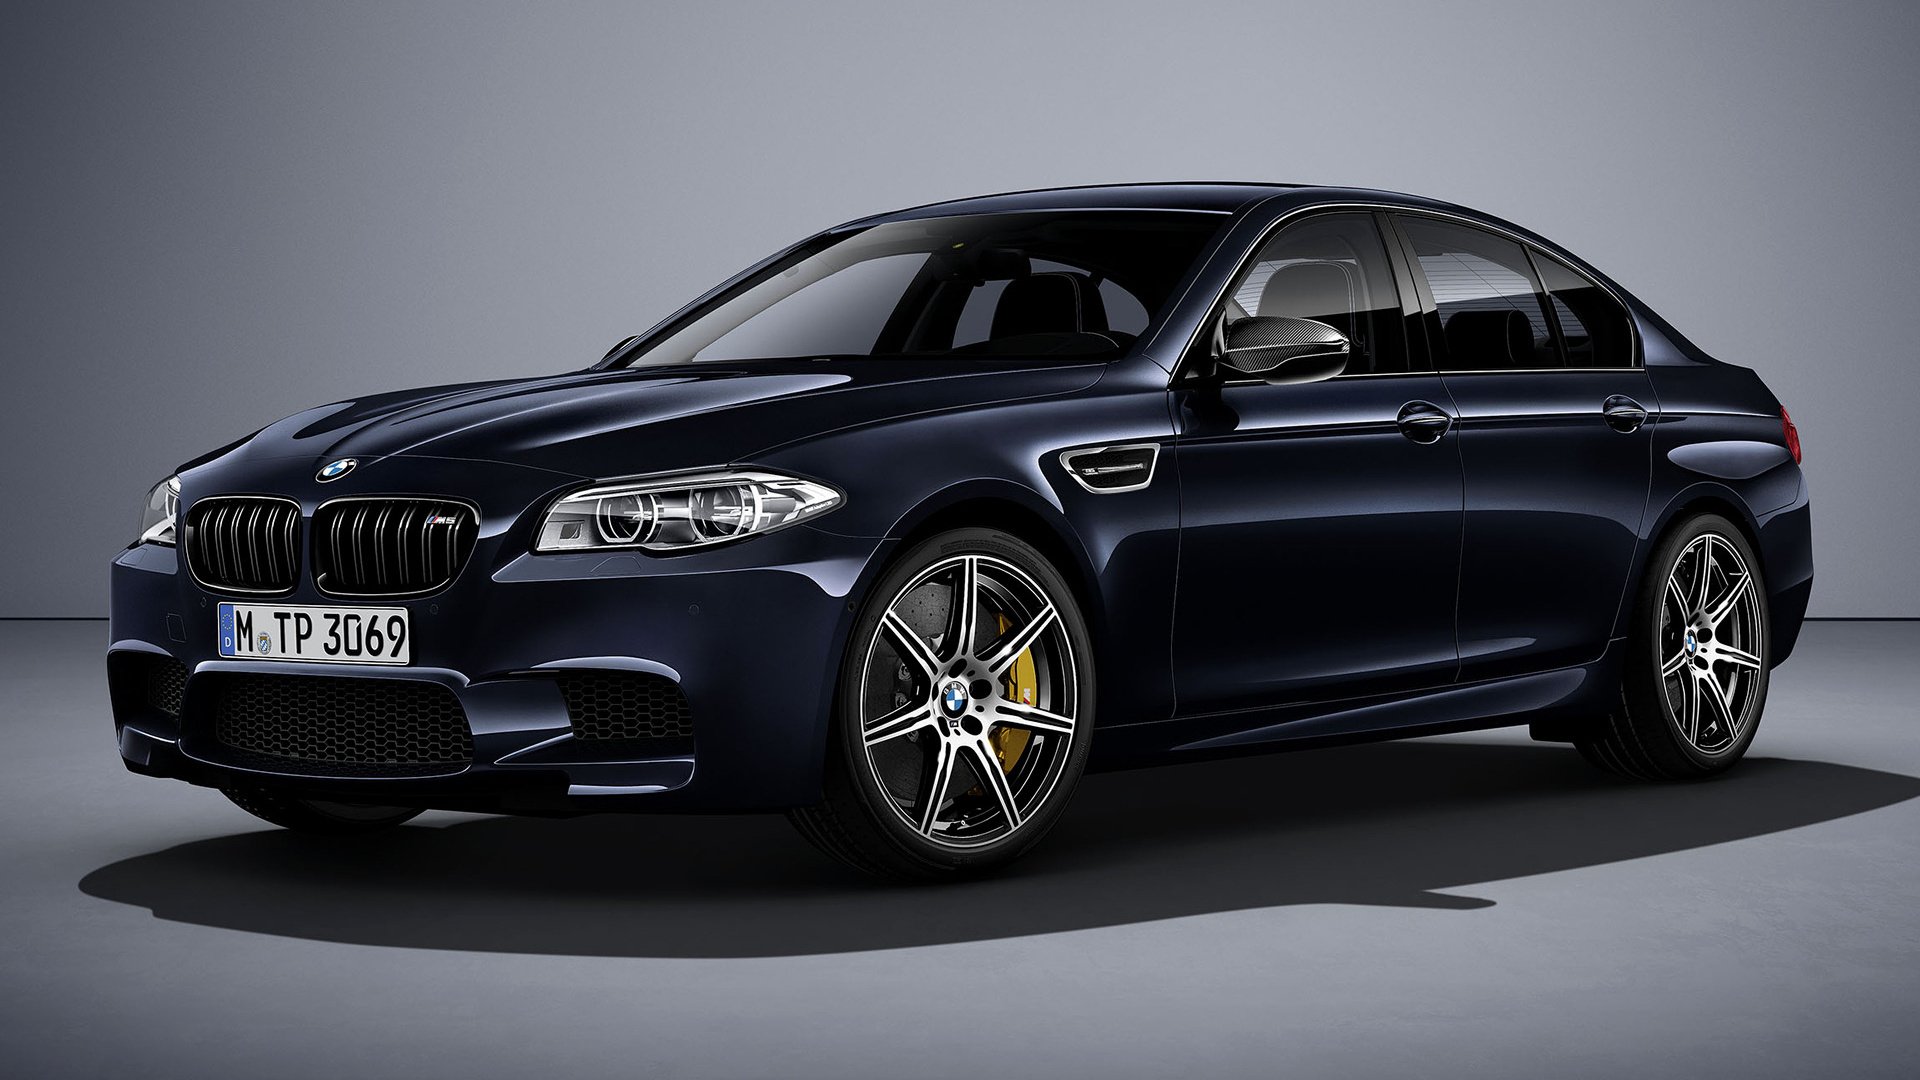 2016 Bmw M5 Competition Edition Hd Wallpaper Background Image 1920x1080